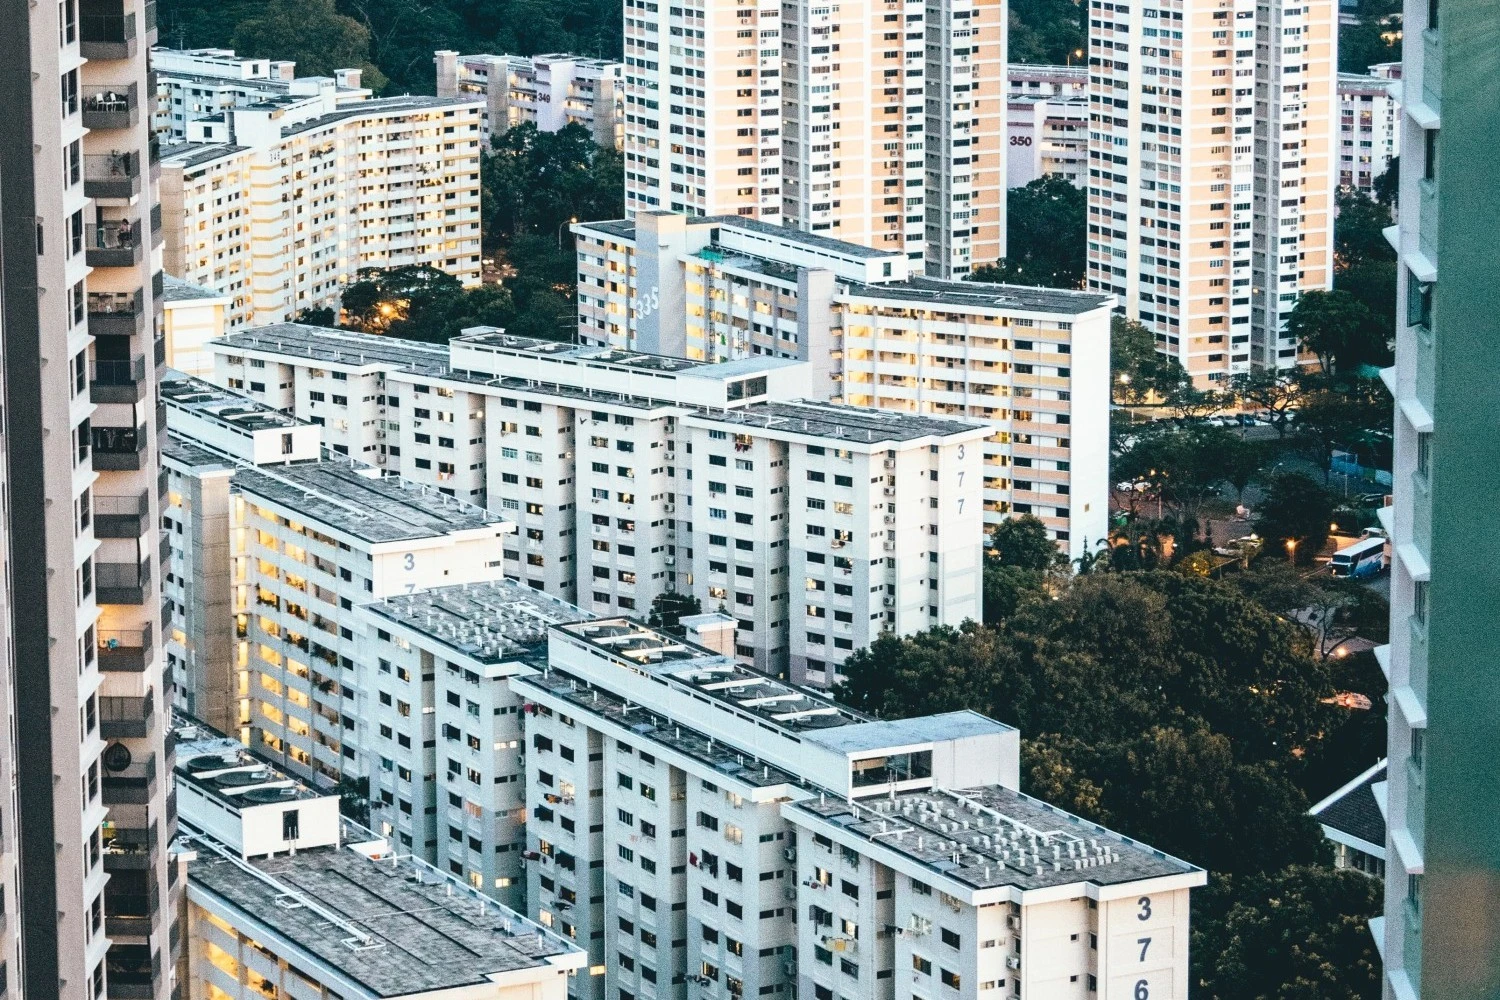 Types of Housing in Singapore